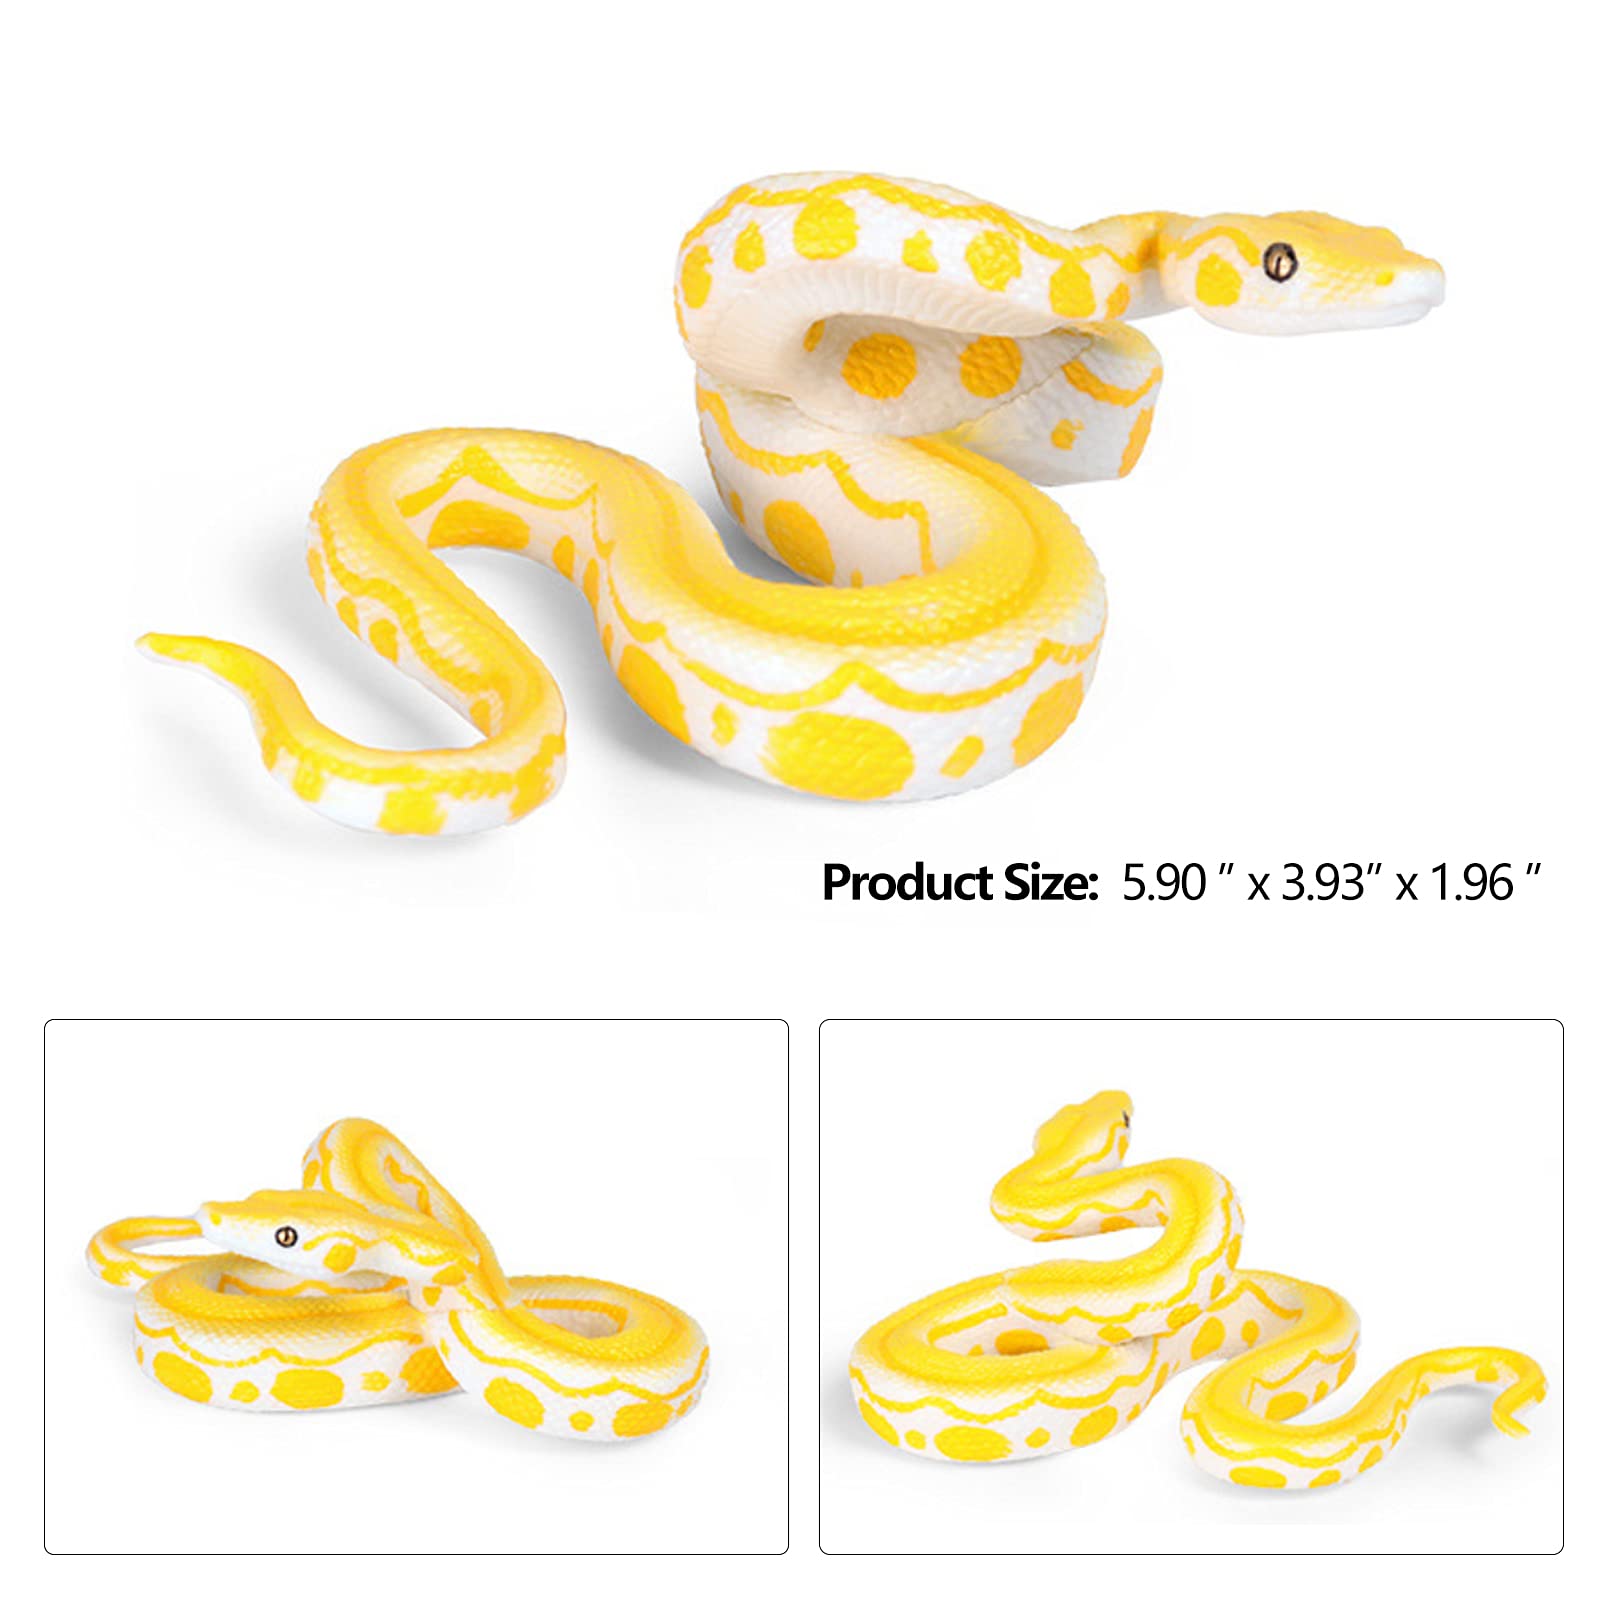 2pcs Realistic Fake Snakes Toy Rubber Snake Figure for Halloween Prank Props Fake Snake Scare Birds and Squirrels, Boa Constrictor Figurines (Pack of 2)